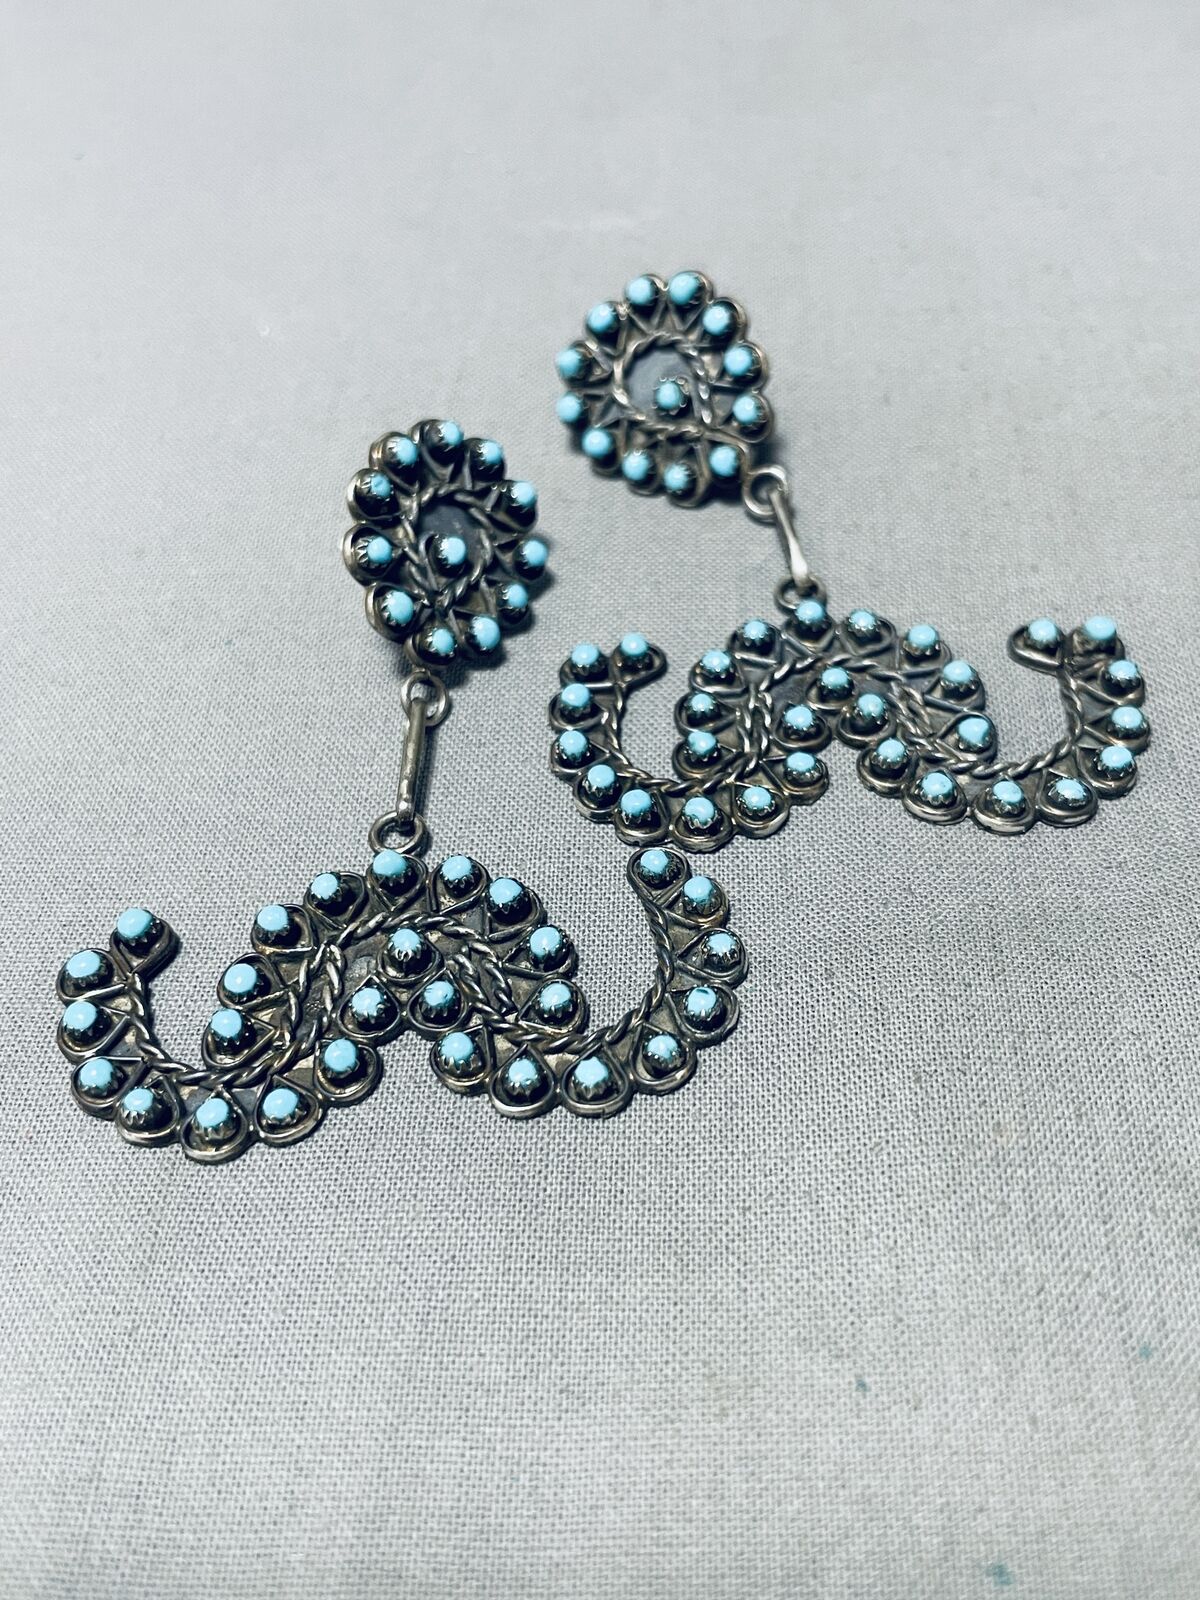 ONE OF THE BEST EVER VINTAGE ZUNI TURQUOISE STERLING SILVER EARRINGS